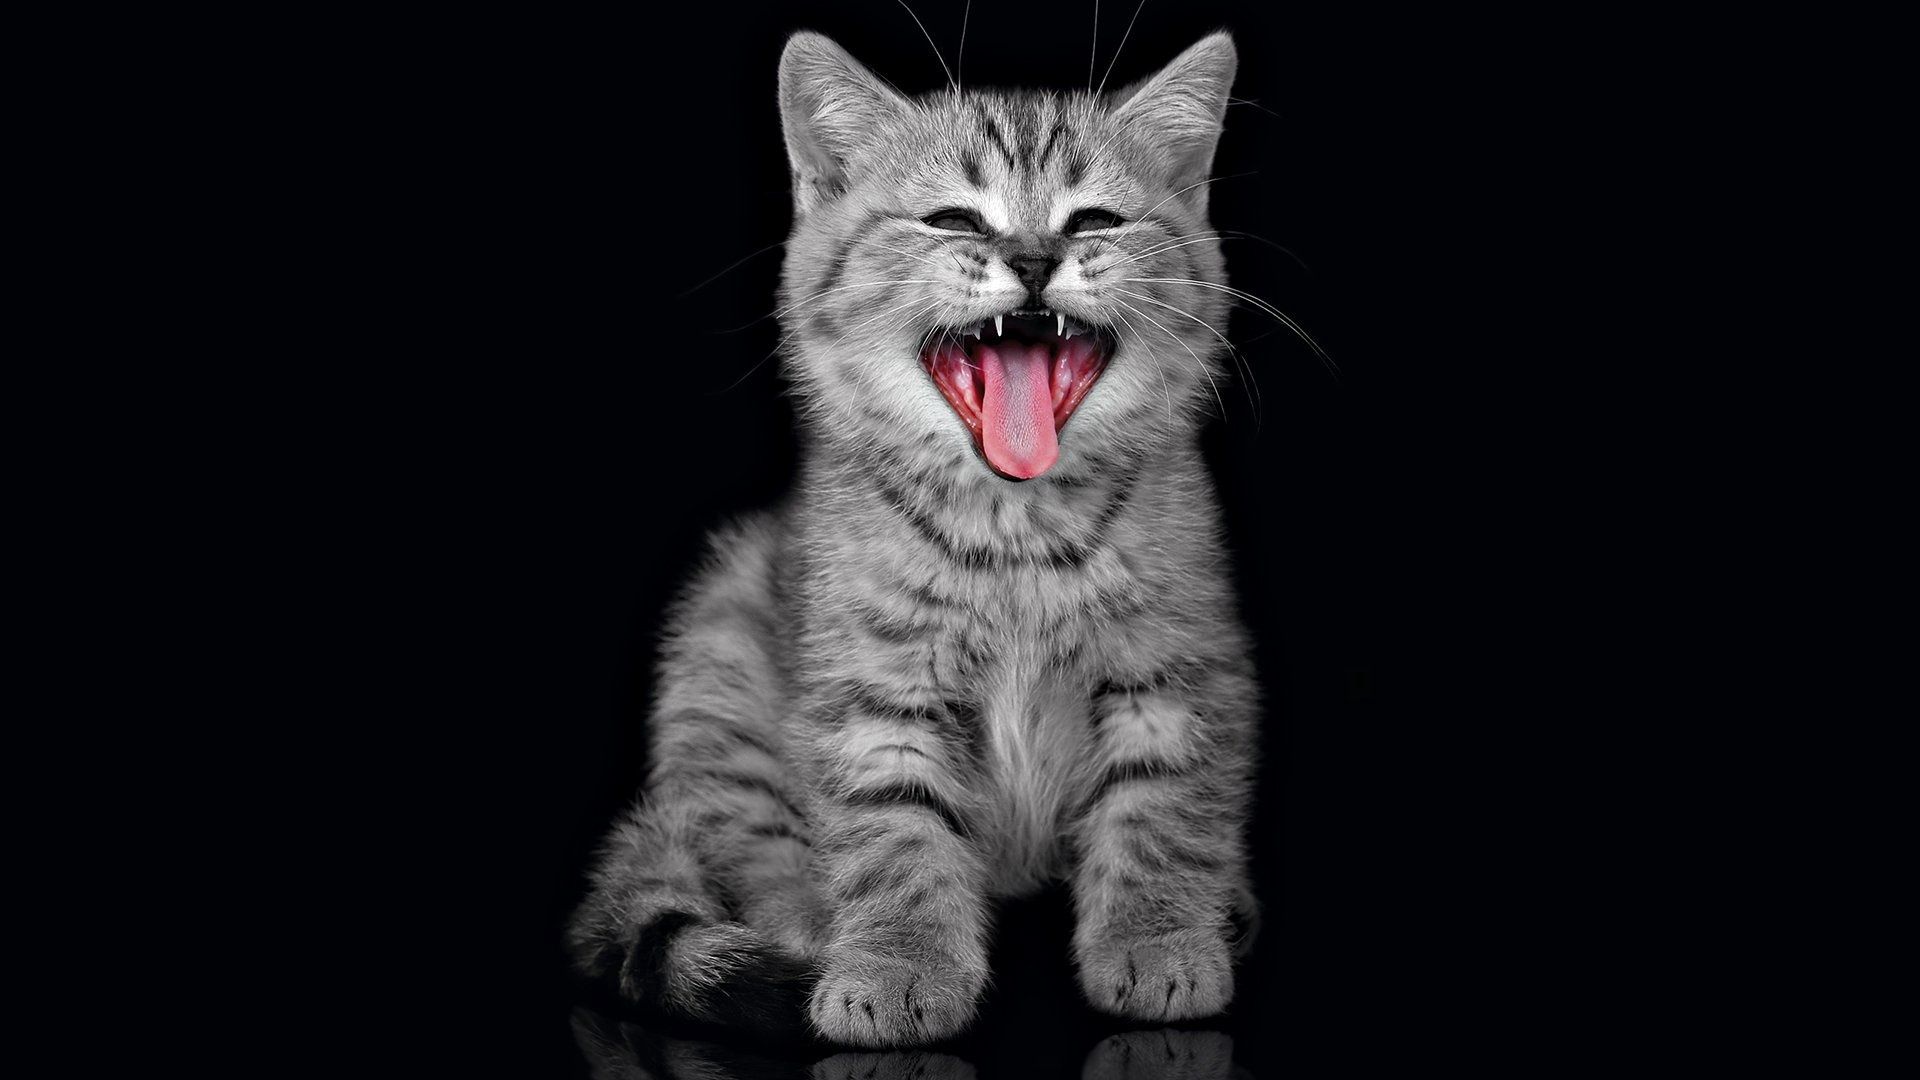 110697 Screensavers and Wallpapers Scream for phone. Download animals, dark, fluffy, kitty, kitten, scream, cry pictures for free